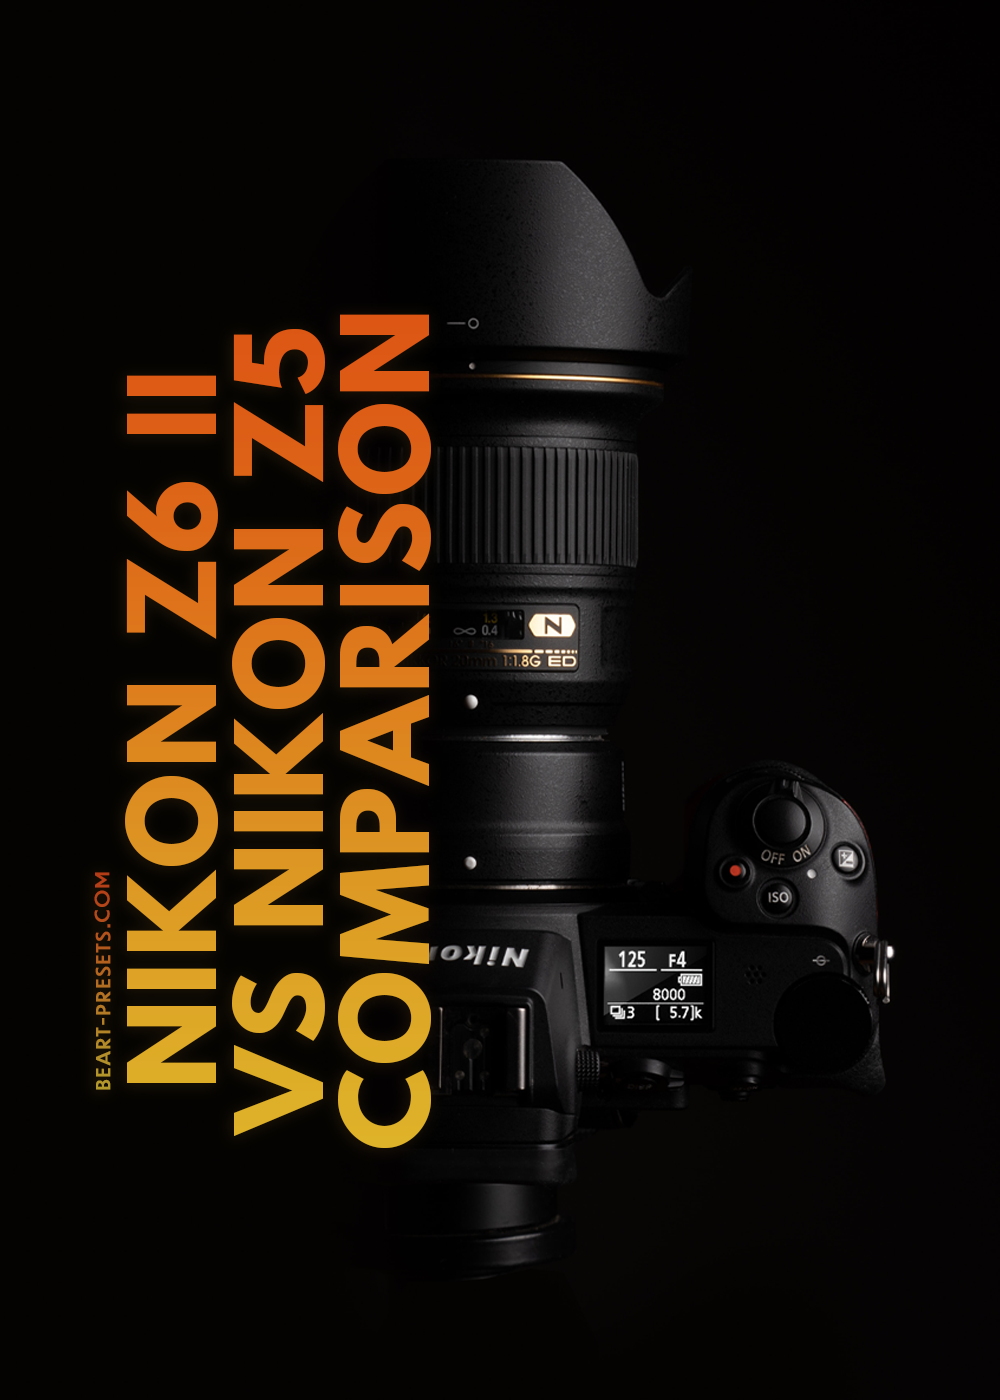 From Nikon D750 to Z6ii – is that a good move? – frederikboving